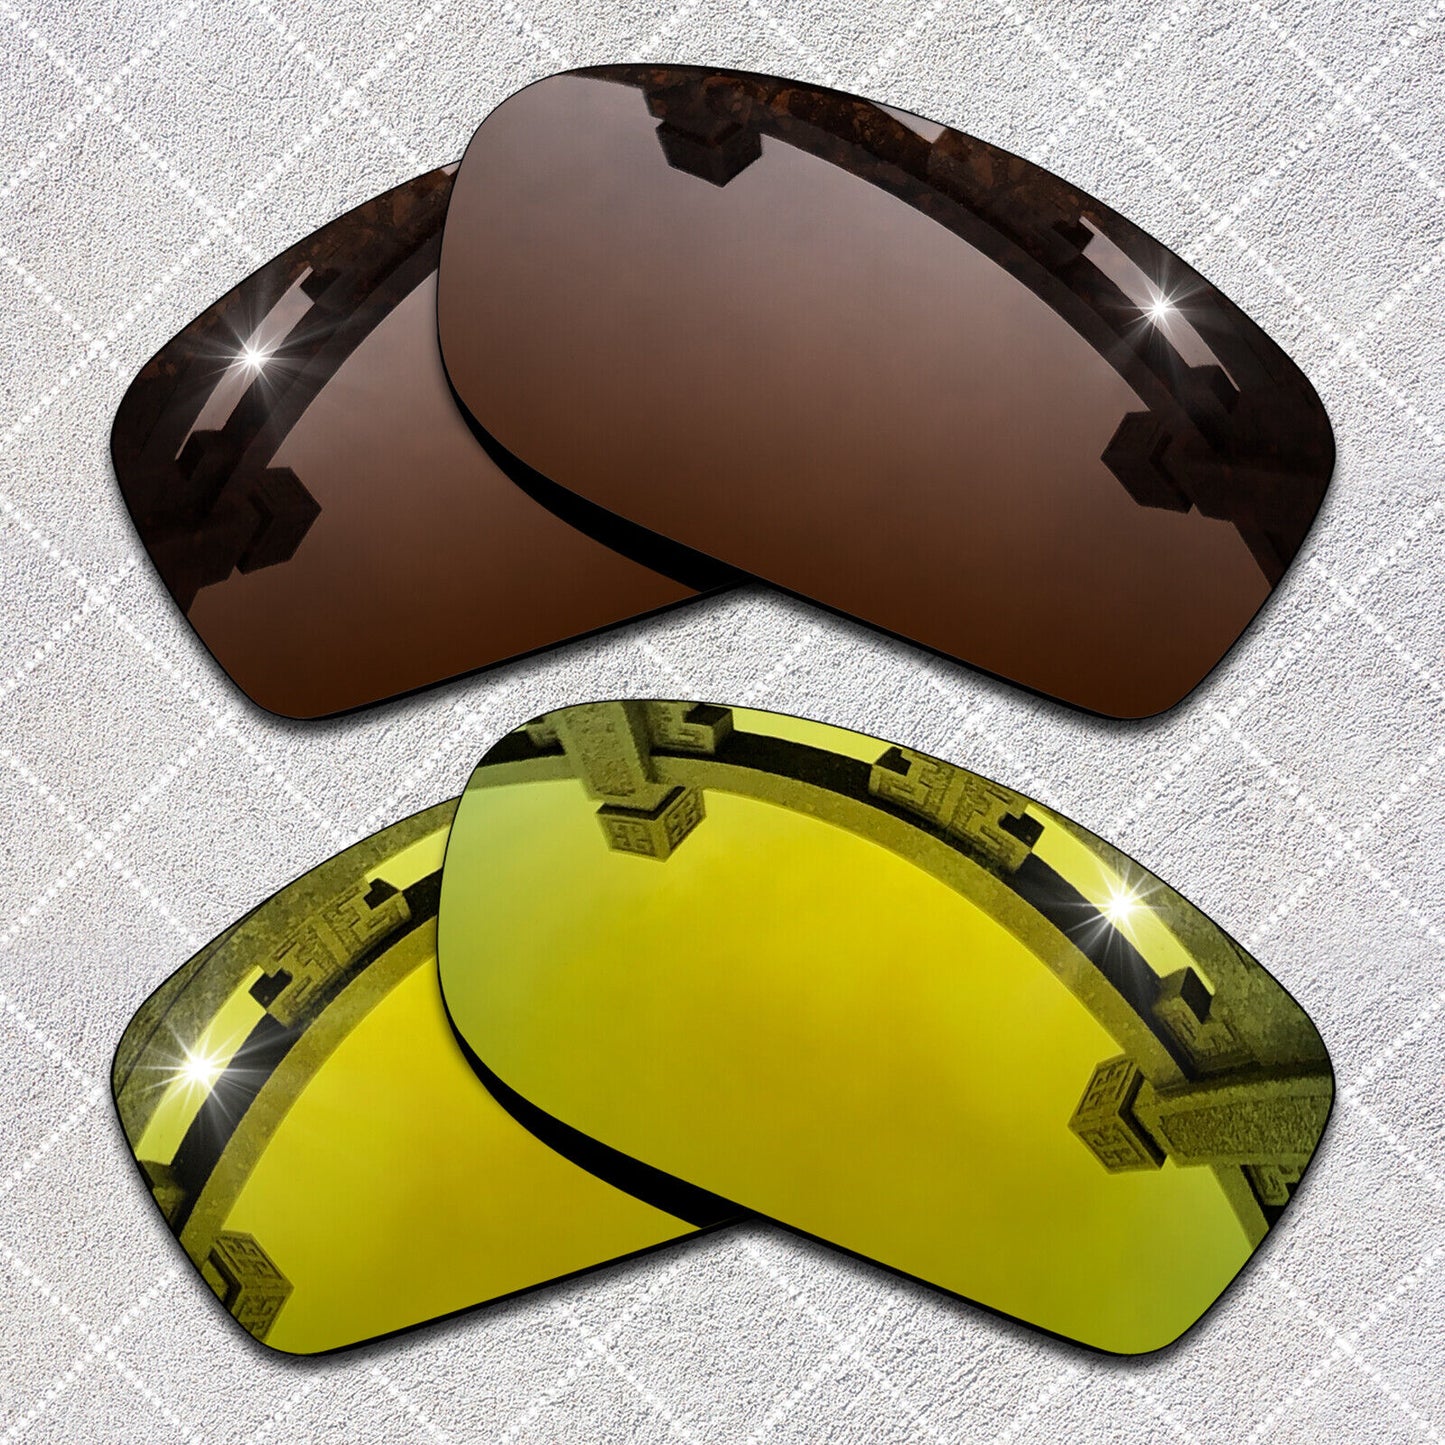 HeyRay Replacement Lenses for Fives Squared Sunglasses Polarized - Options